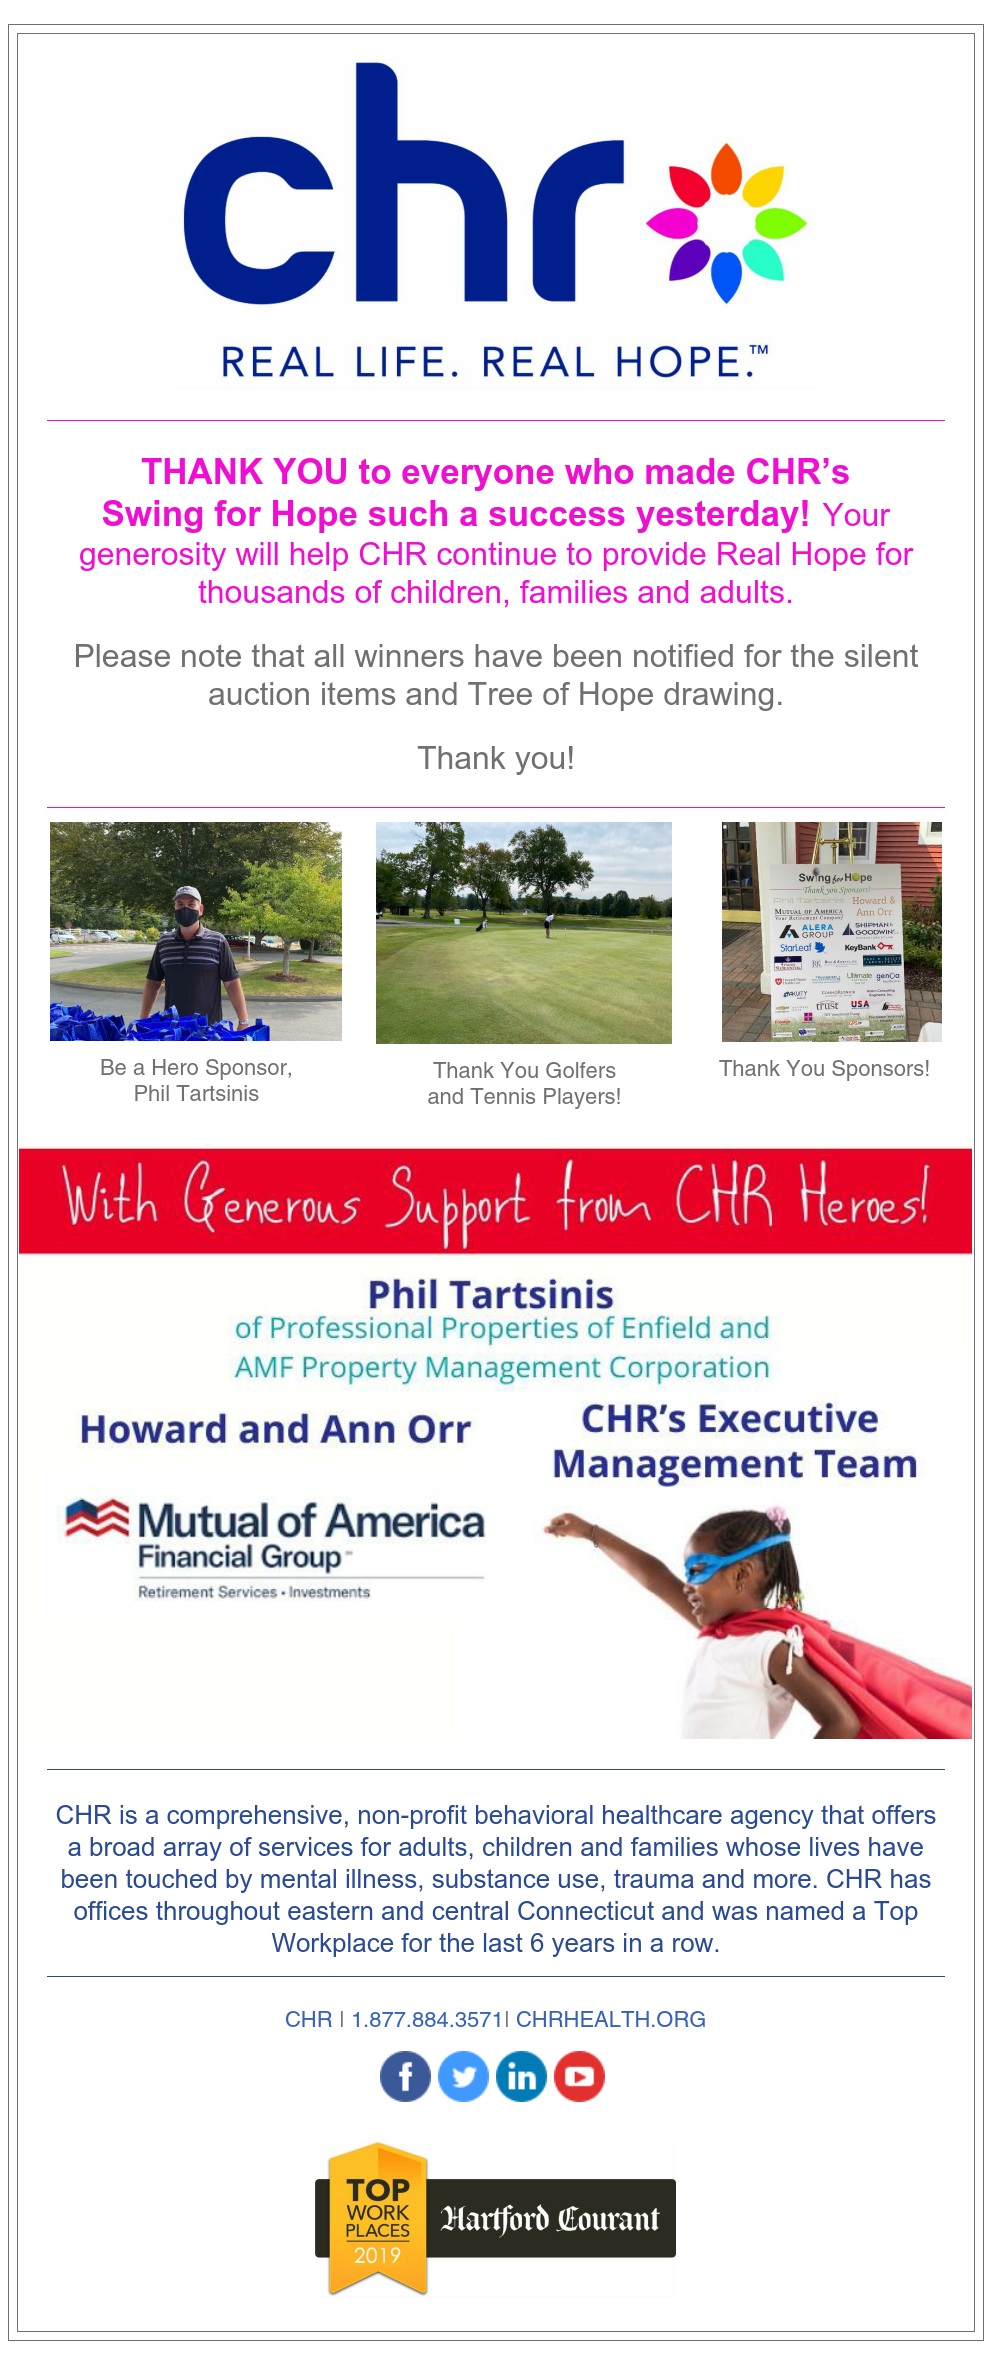 THANK YOU to everyone who made CHR’s Swing for Hope such a success yesterday! 